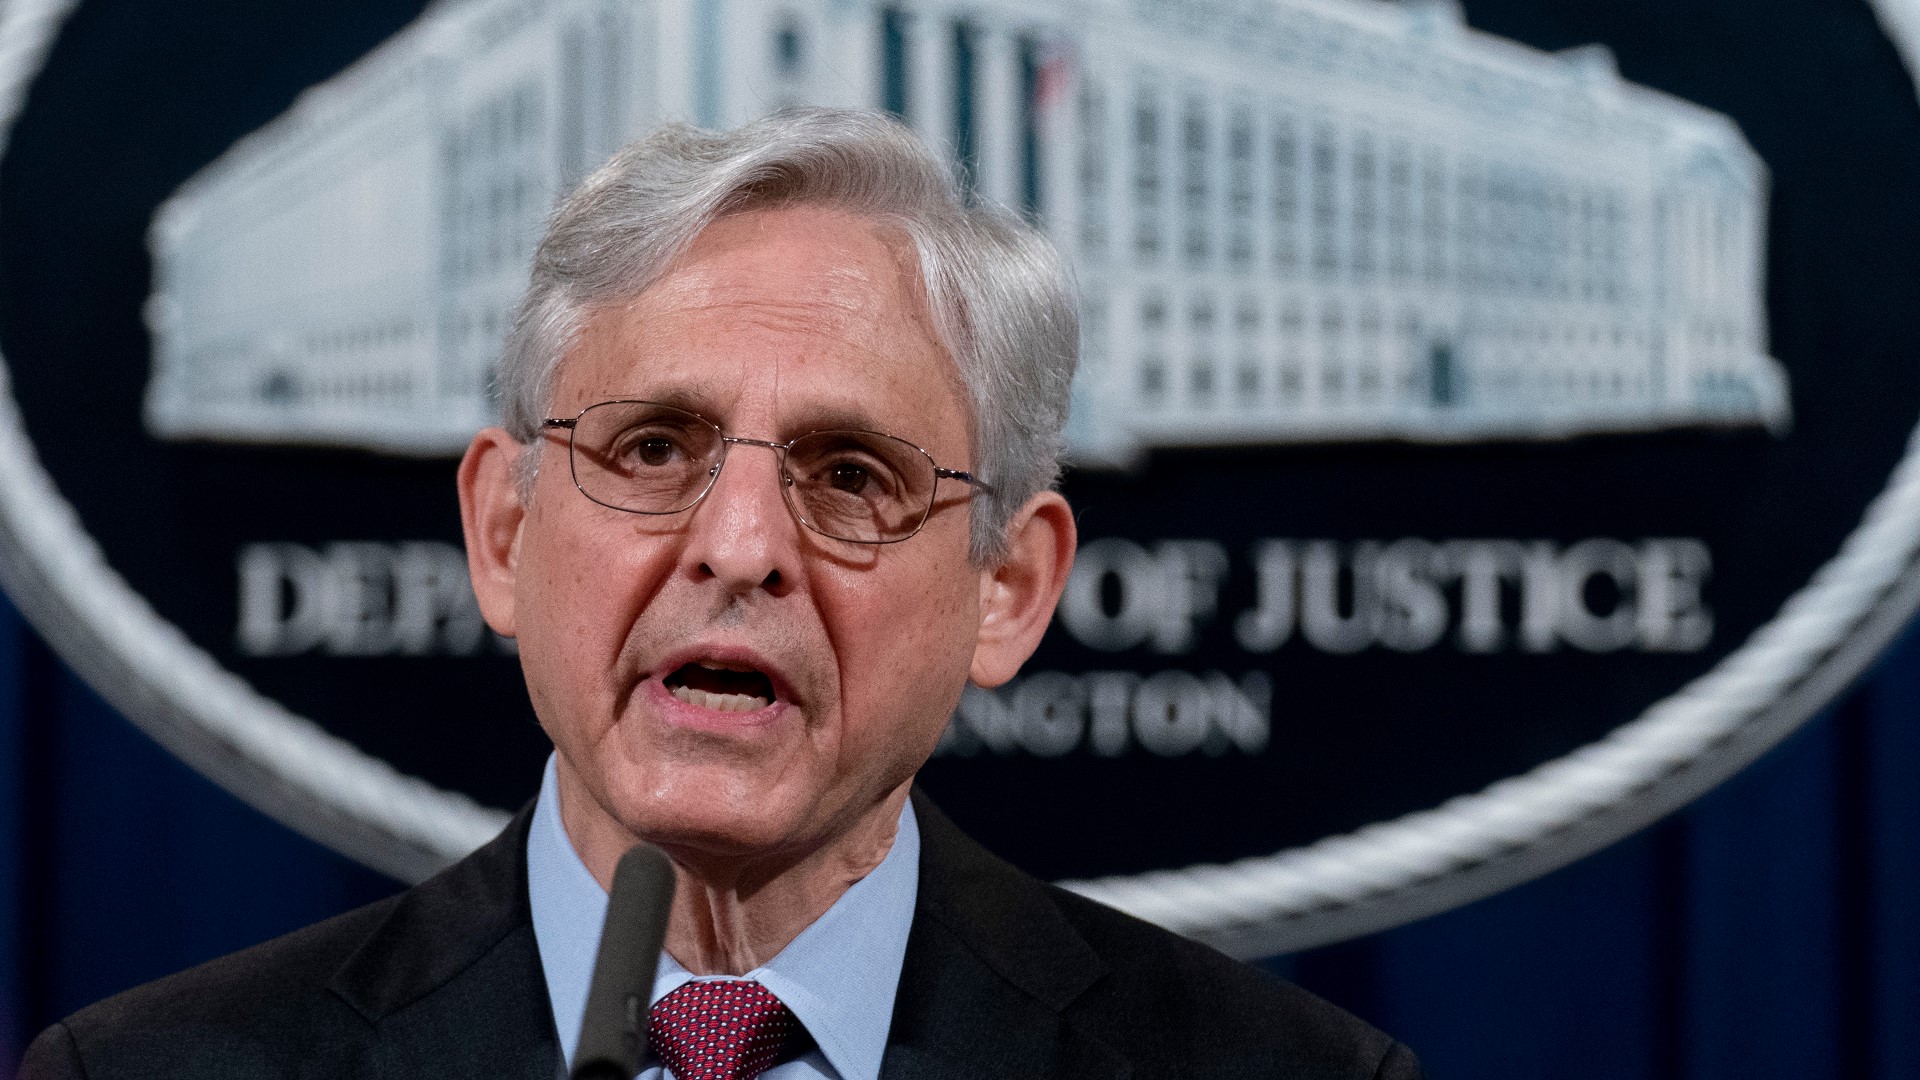 "I personally approved the decision to seek a search warrant in this matter," said Garland.